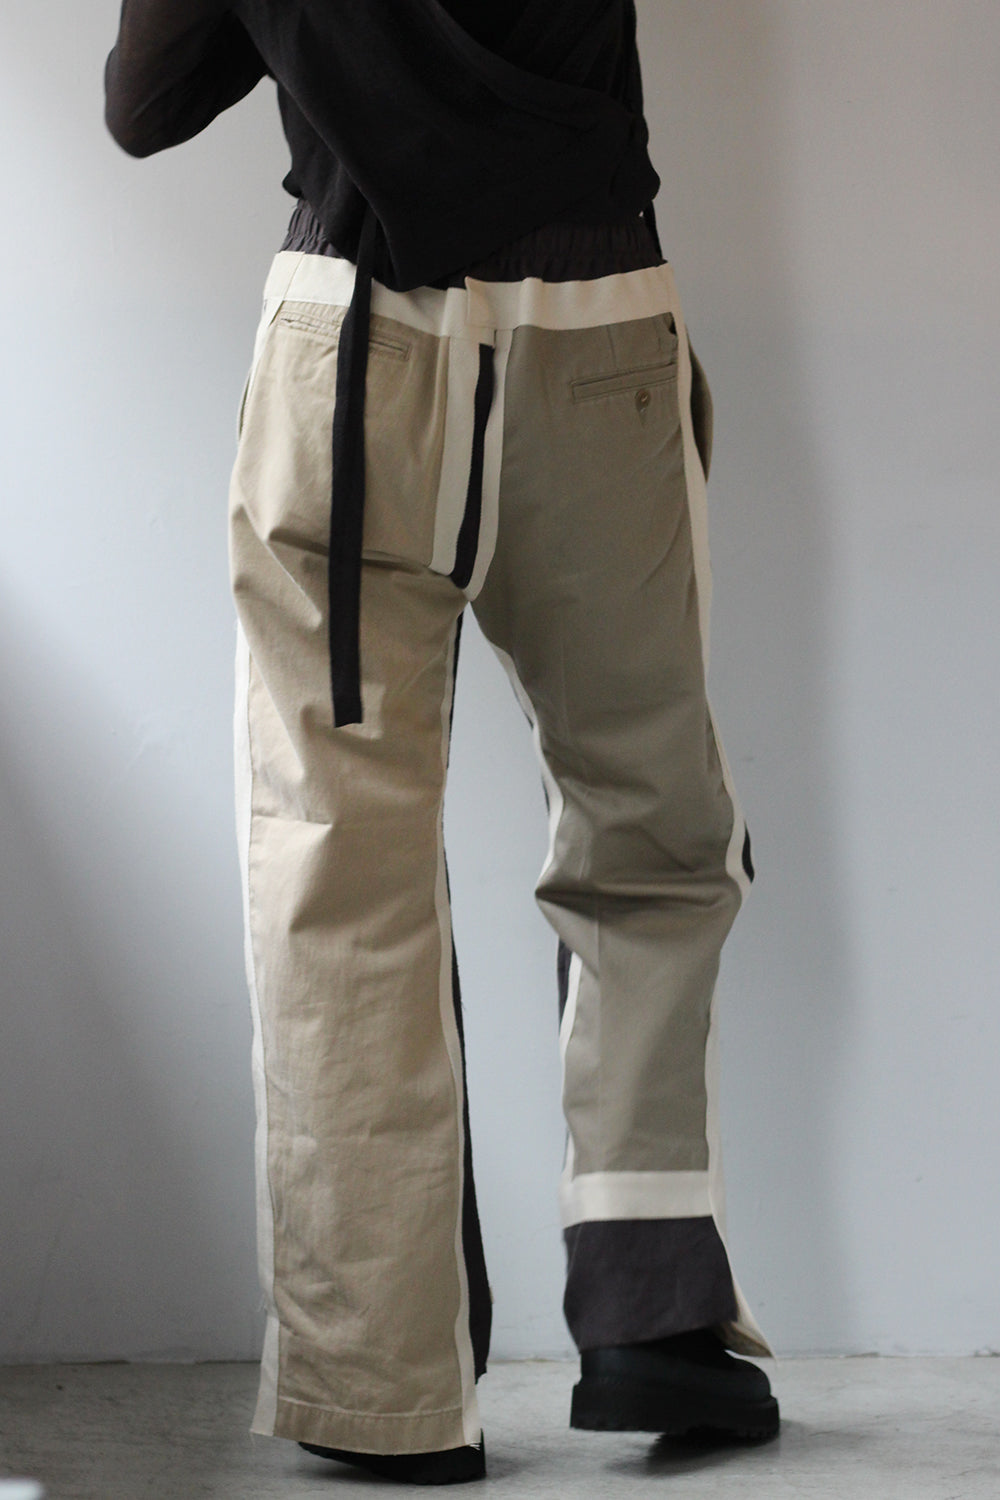 Rebuild by Needles "Chino Pant -> Covered Pant" (charcoal) 3